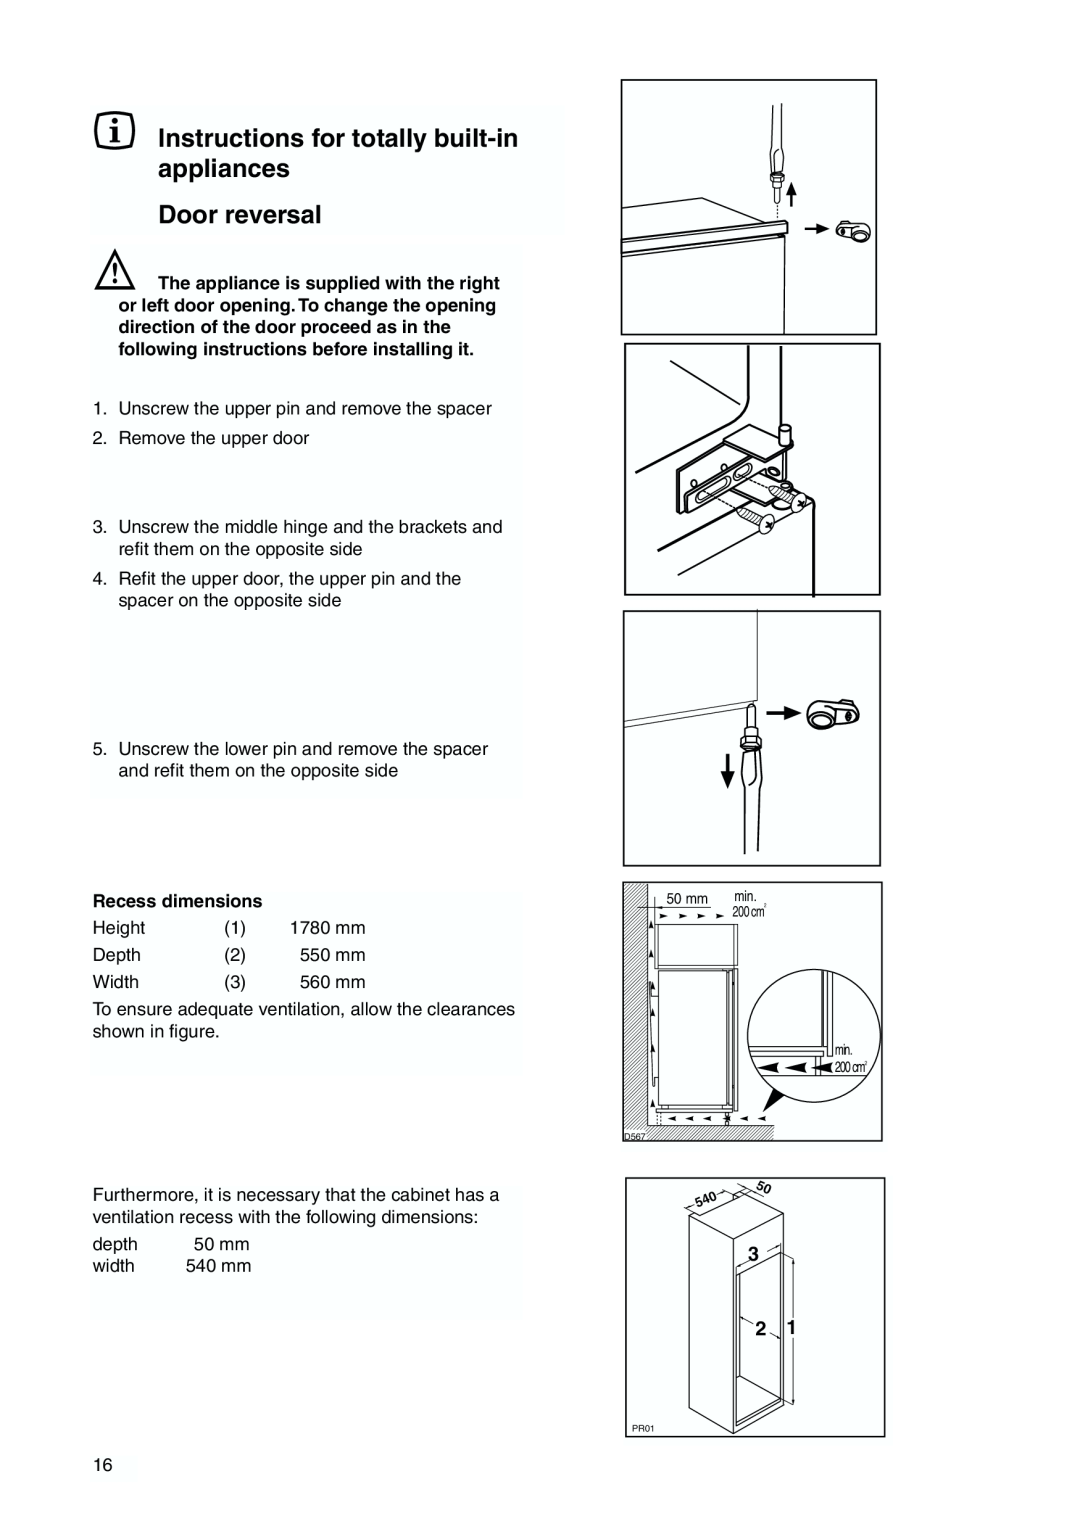 Tricity Bendix TBFF 55 Instructions for totally built-in appliances Door reversal, Recess dimensions 